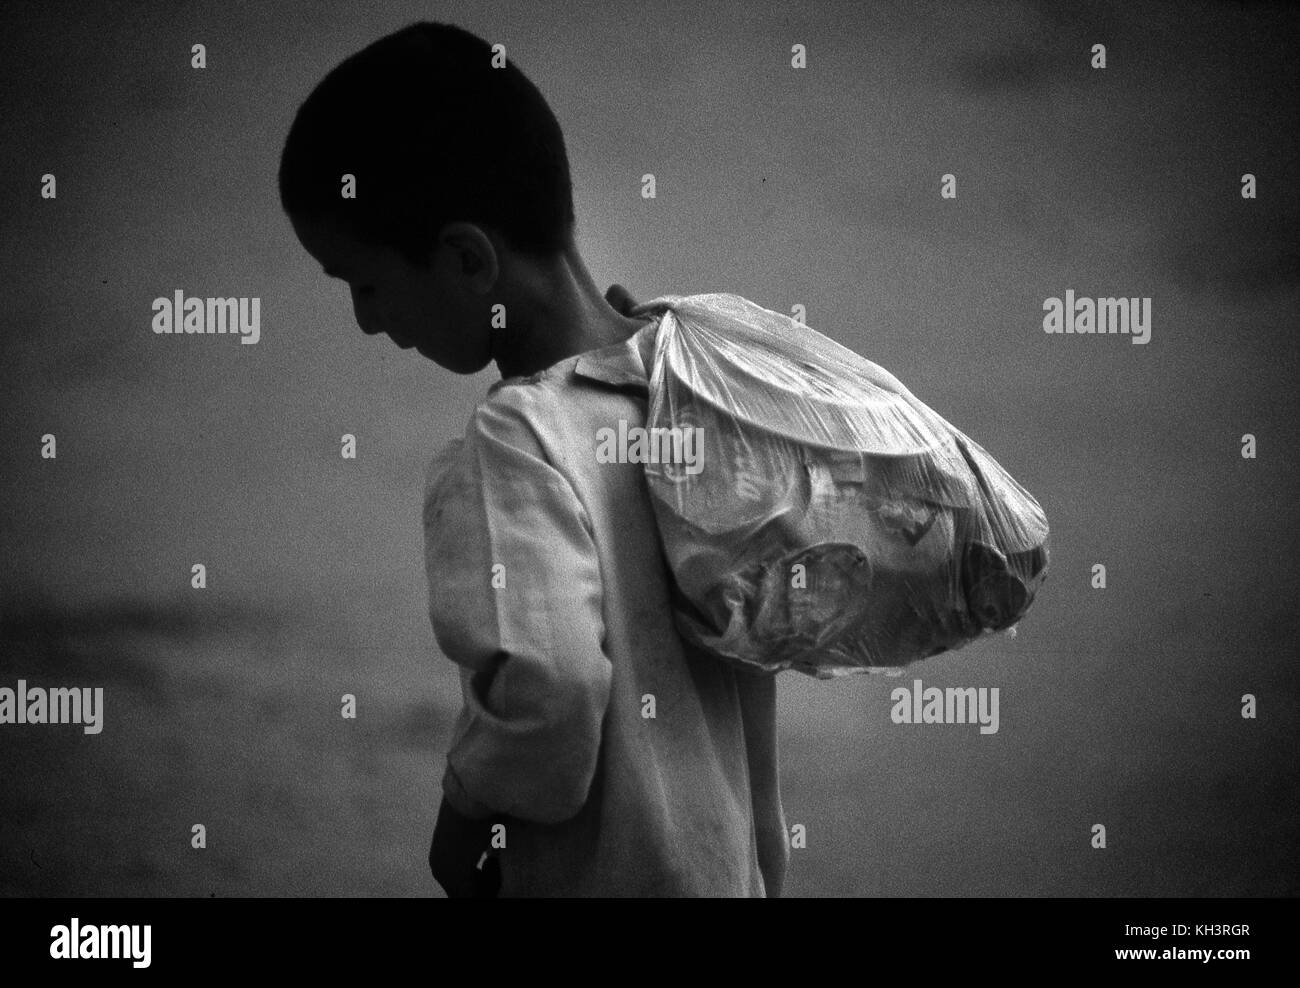 Popularely called 'Garbage children', they are afghan refugee children who go to de dumps to collect any sellable objecs, in this case it is a child which is carrying the tin objects he found in the fruit market dump in Rawalpindi, Pakistan. Date: 08/2000. Photo: Xabier Mikel Laburu. Stock Photo